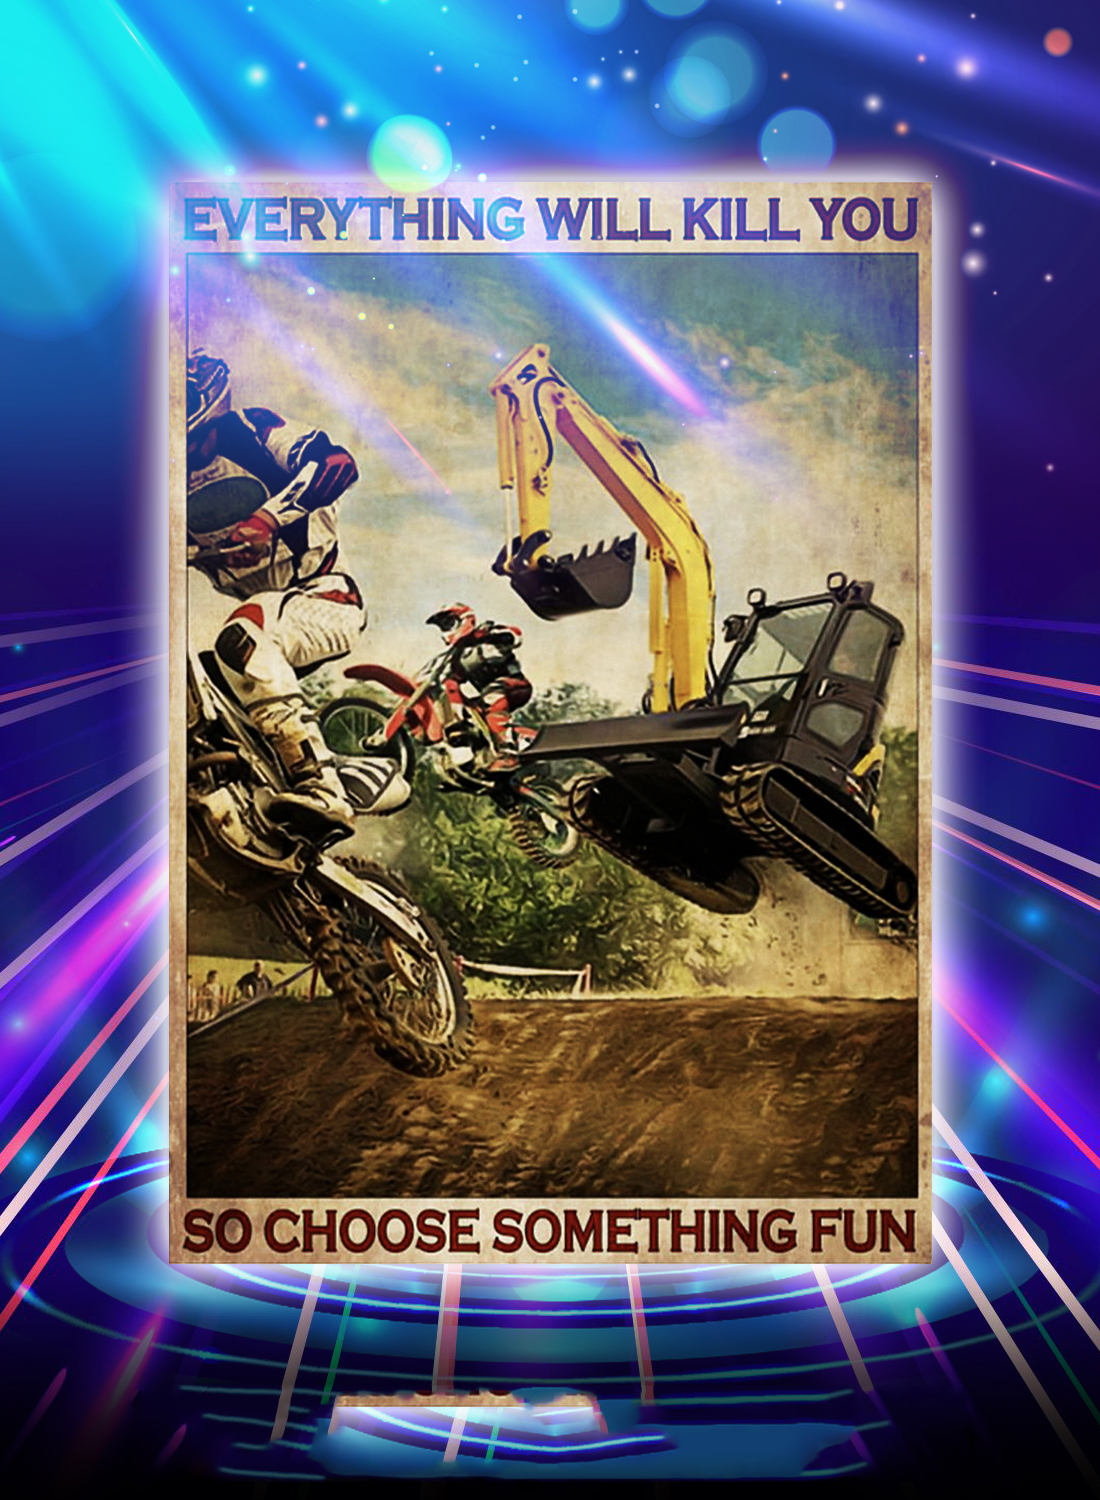 Motocross and excavator everything will kill you so choose something fun poster - A4